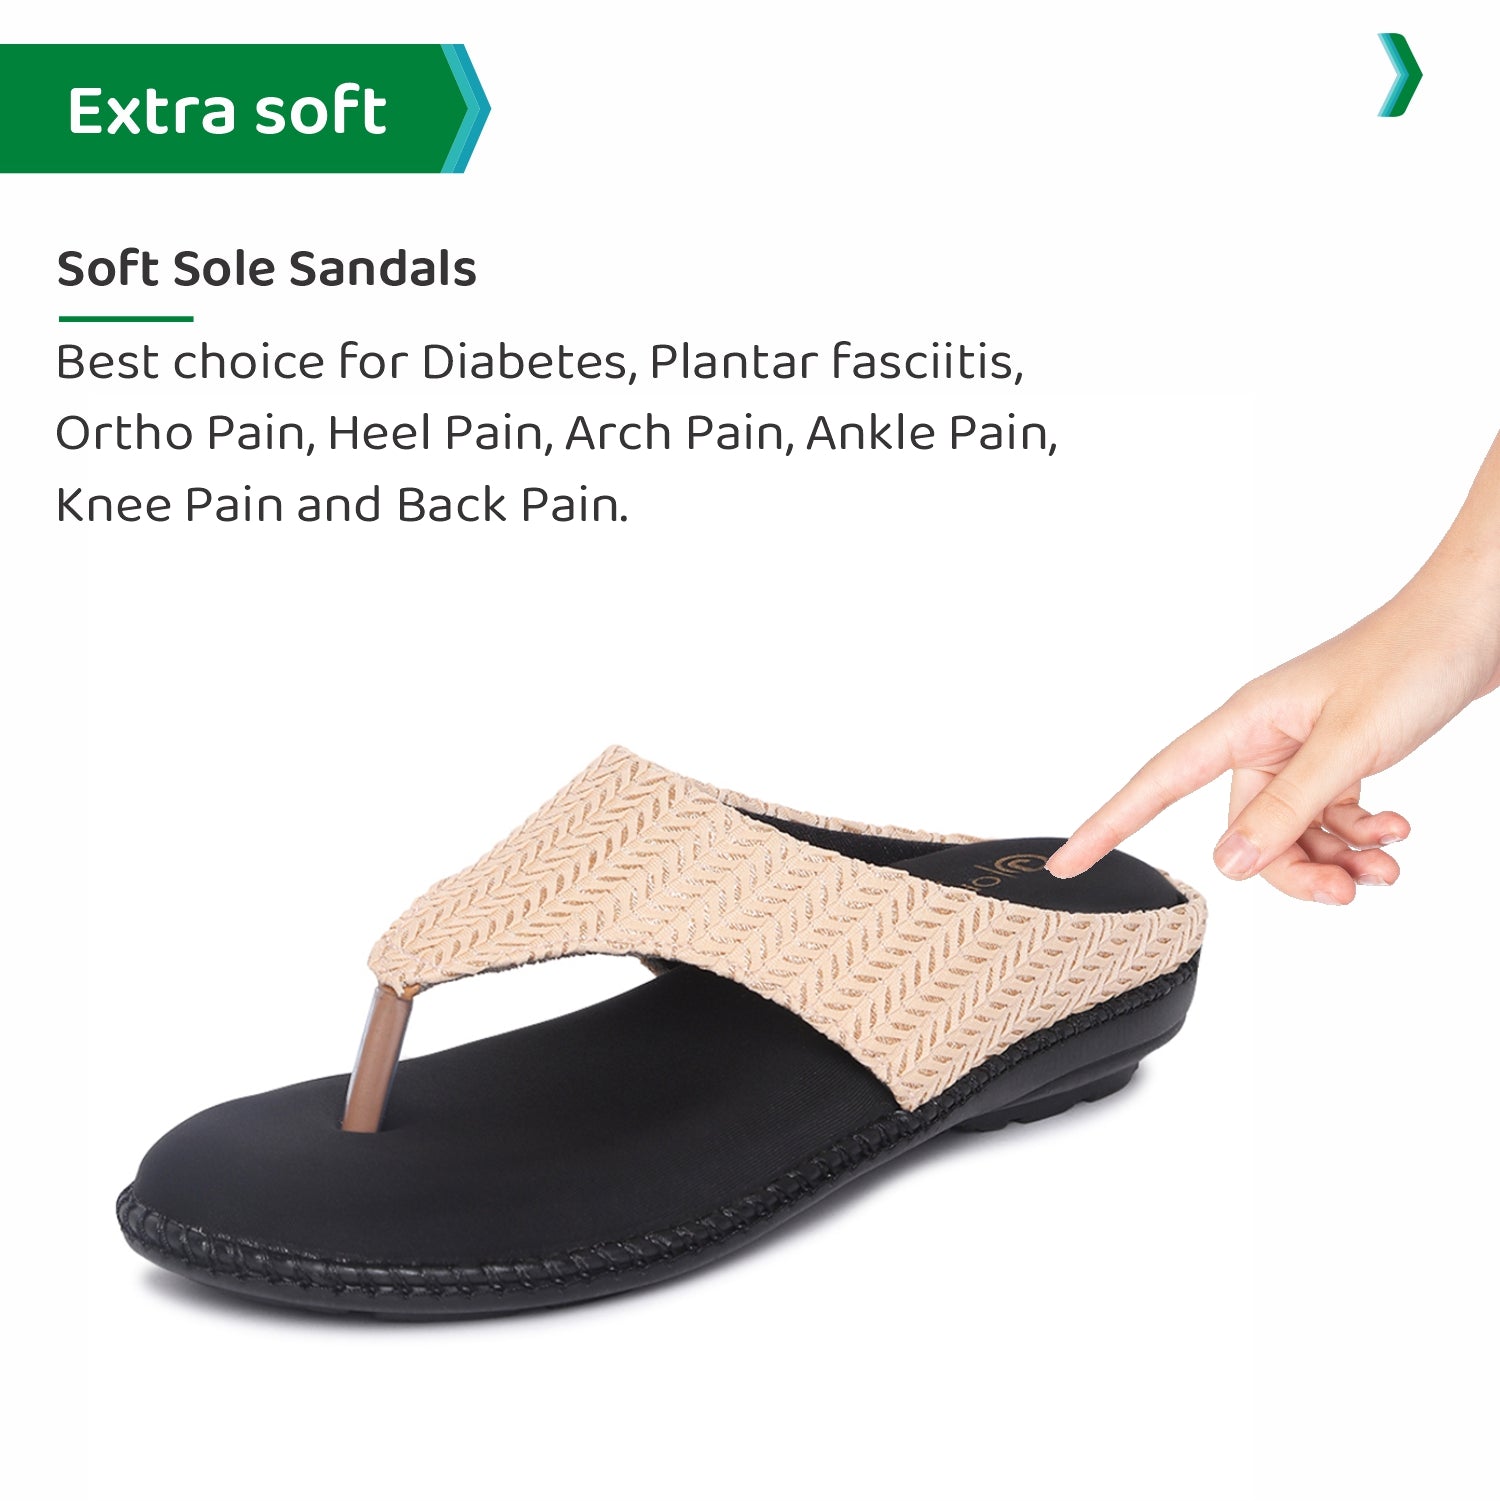 Buy Bronze Flat Sandals for Women by Doctor Extra Soft Online | Ajio.com